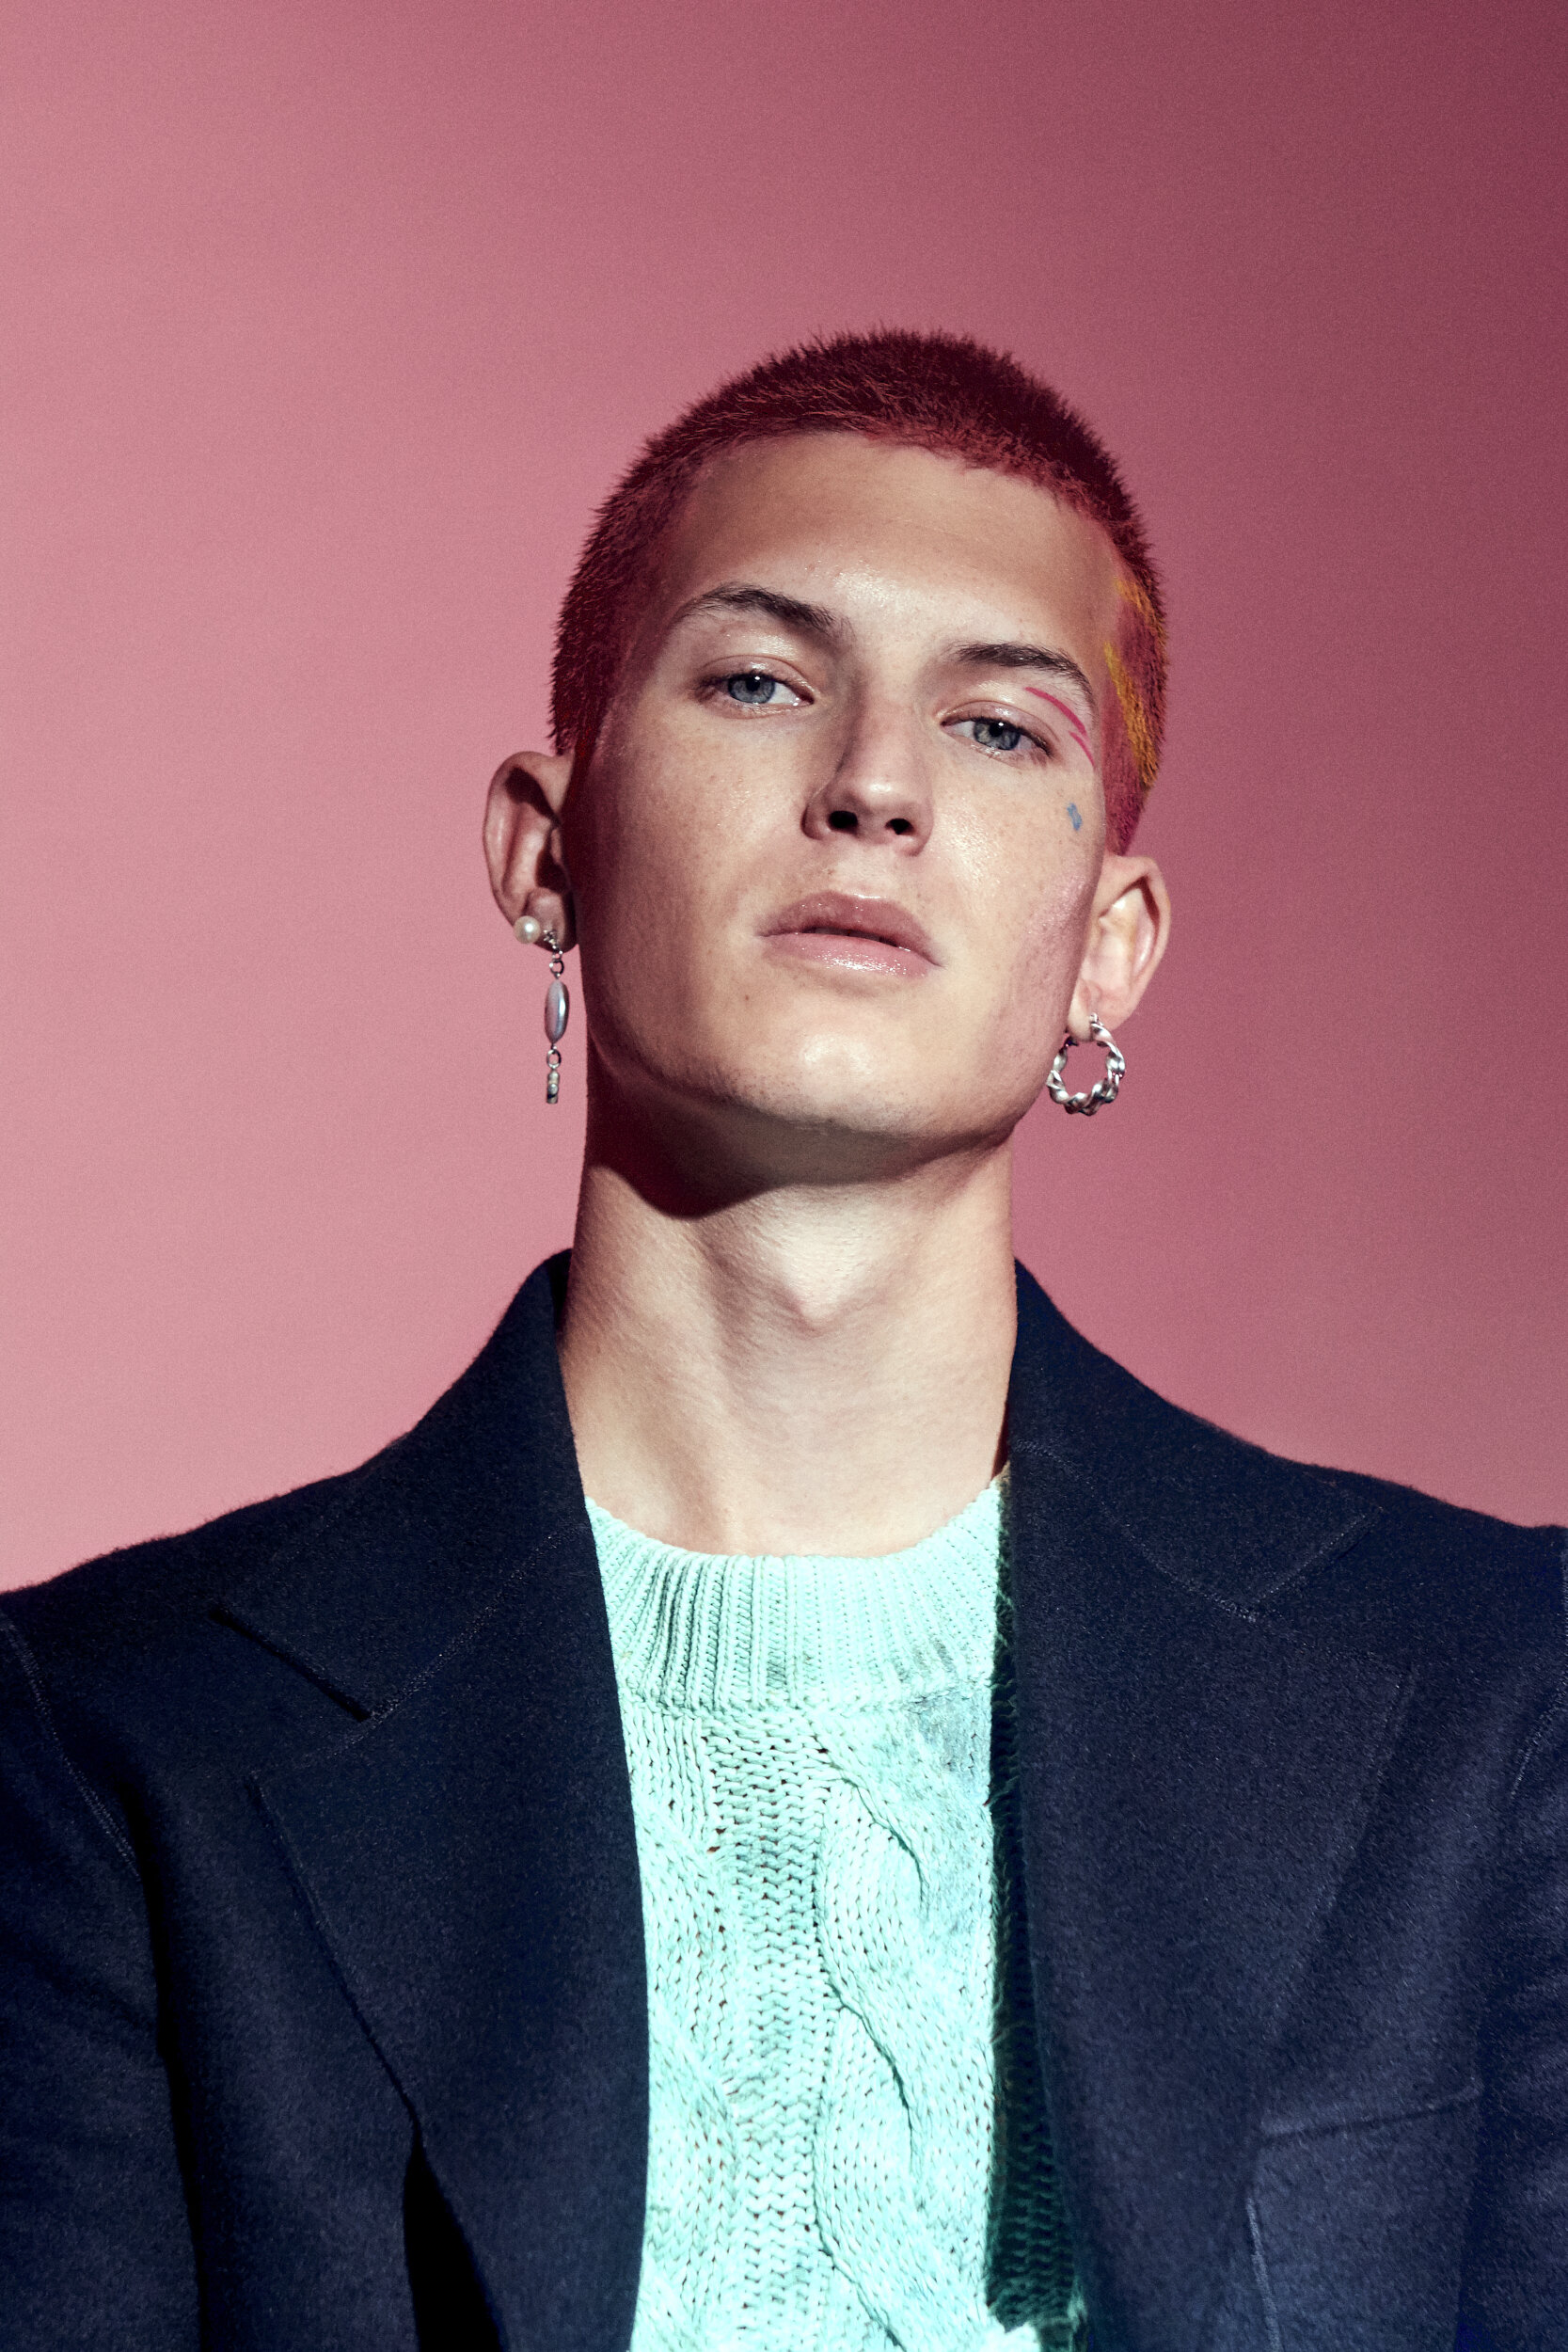   Gus Dapperton by Isaac Anthony for King Kong Garcon  